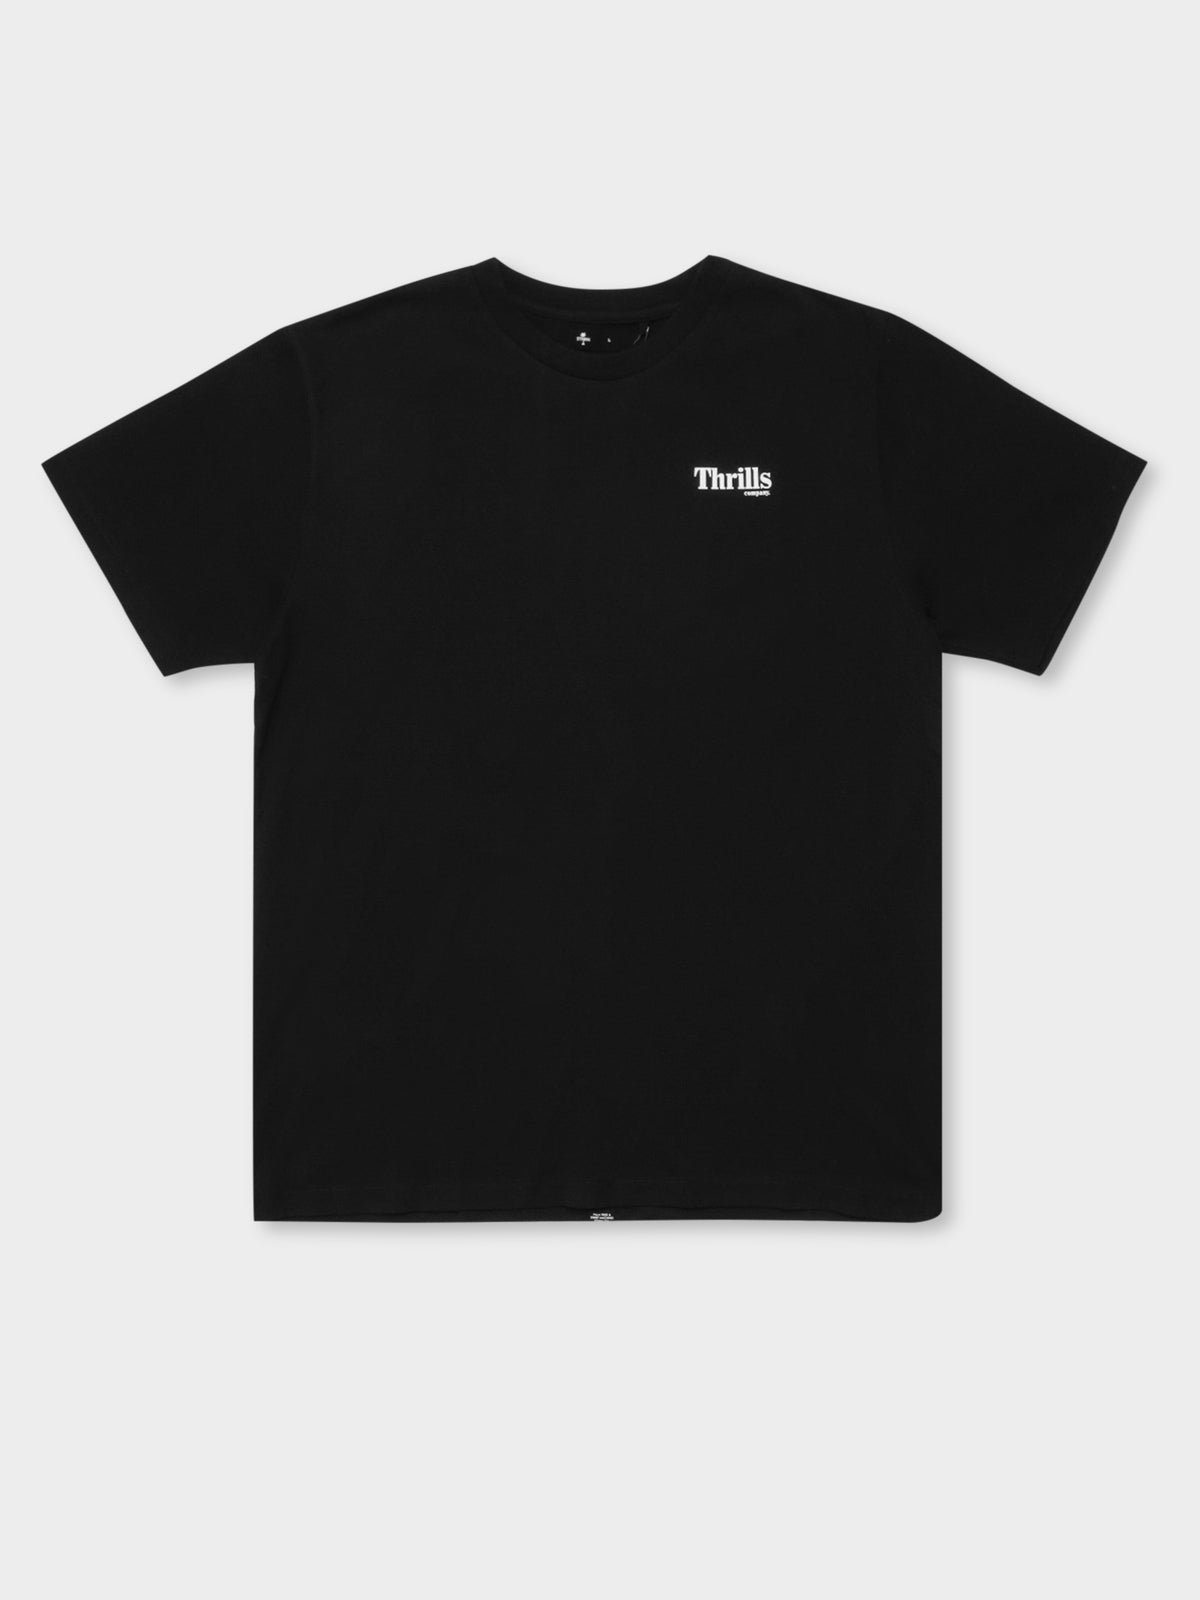 Cycles and Clothing T-Shirt in Black